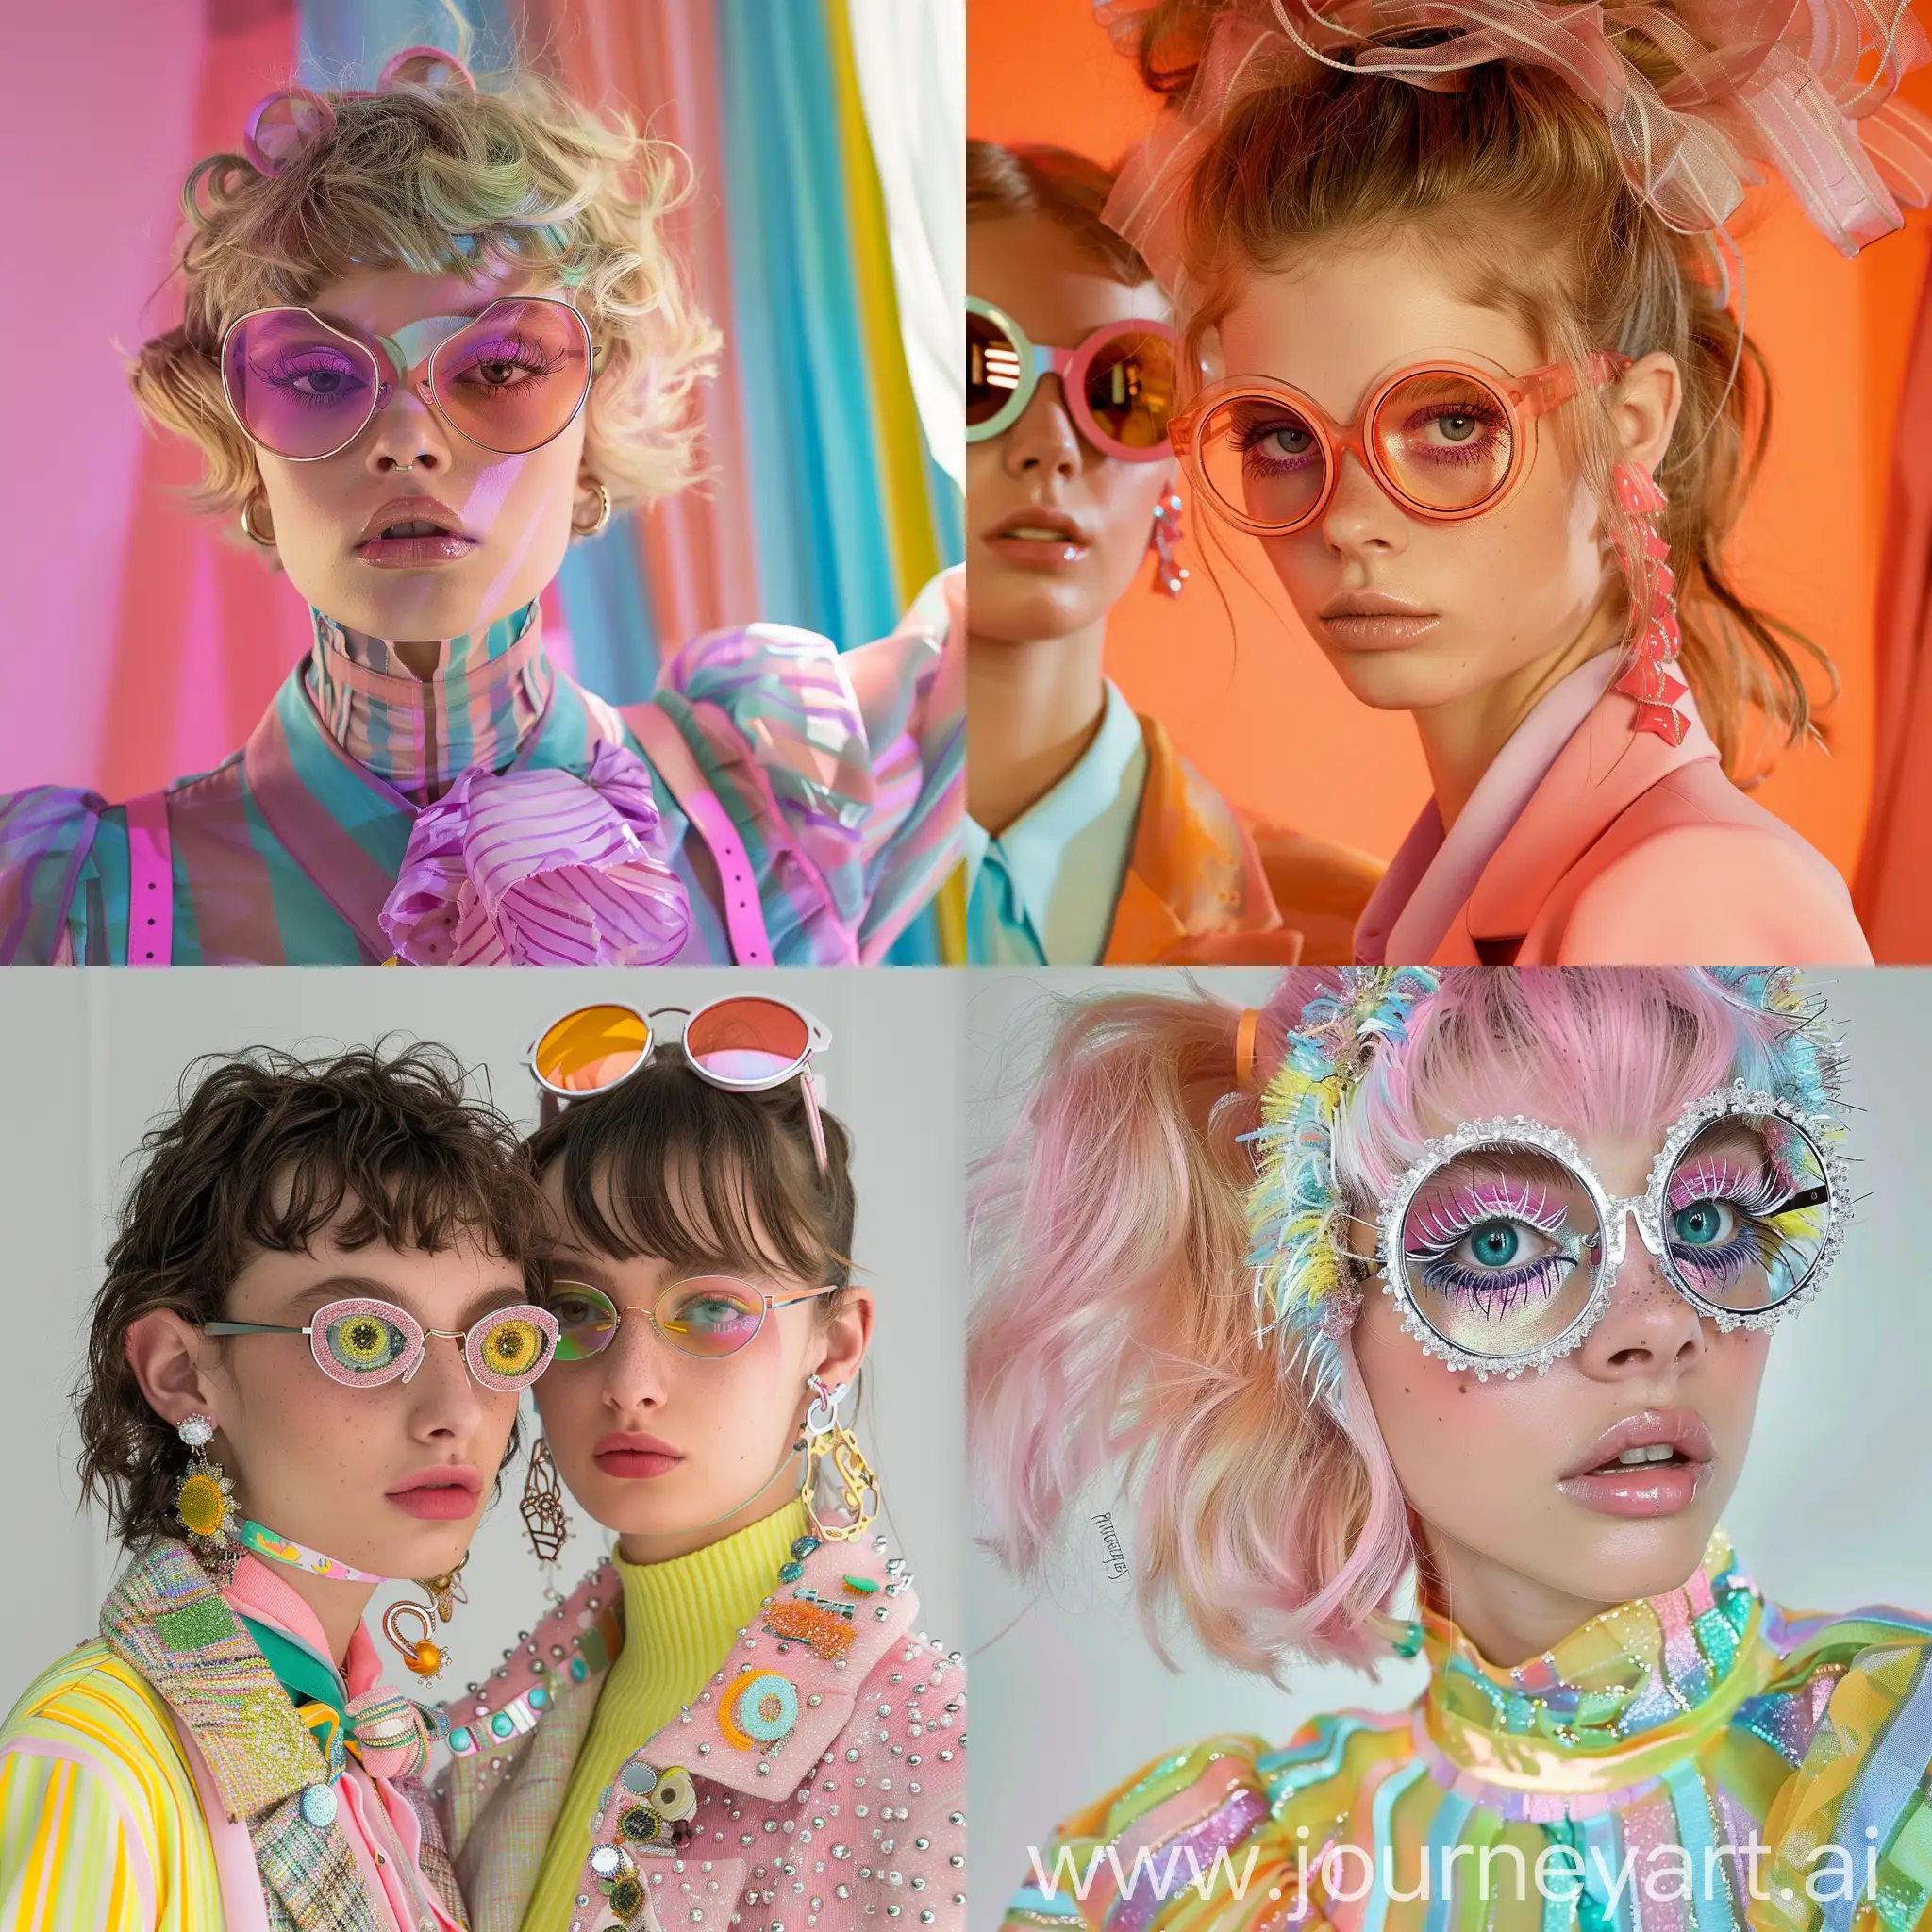 photo shot A sophisticated and fashionable Turkey eighties aesthetic, big eyes, surreal, stranger things, pastel colors style that is polished and well put-together, often incorporating modern trends with timeless pieces catwalk fashion